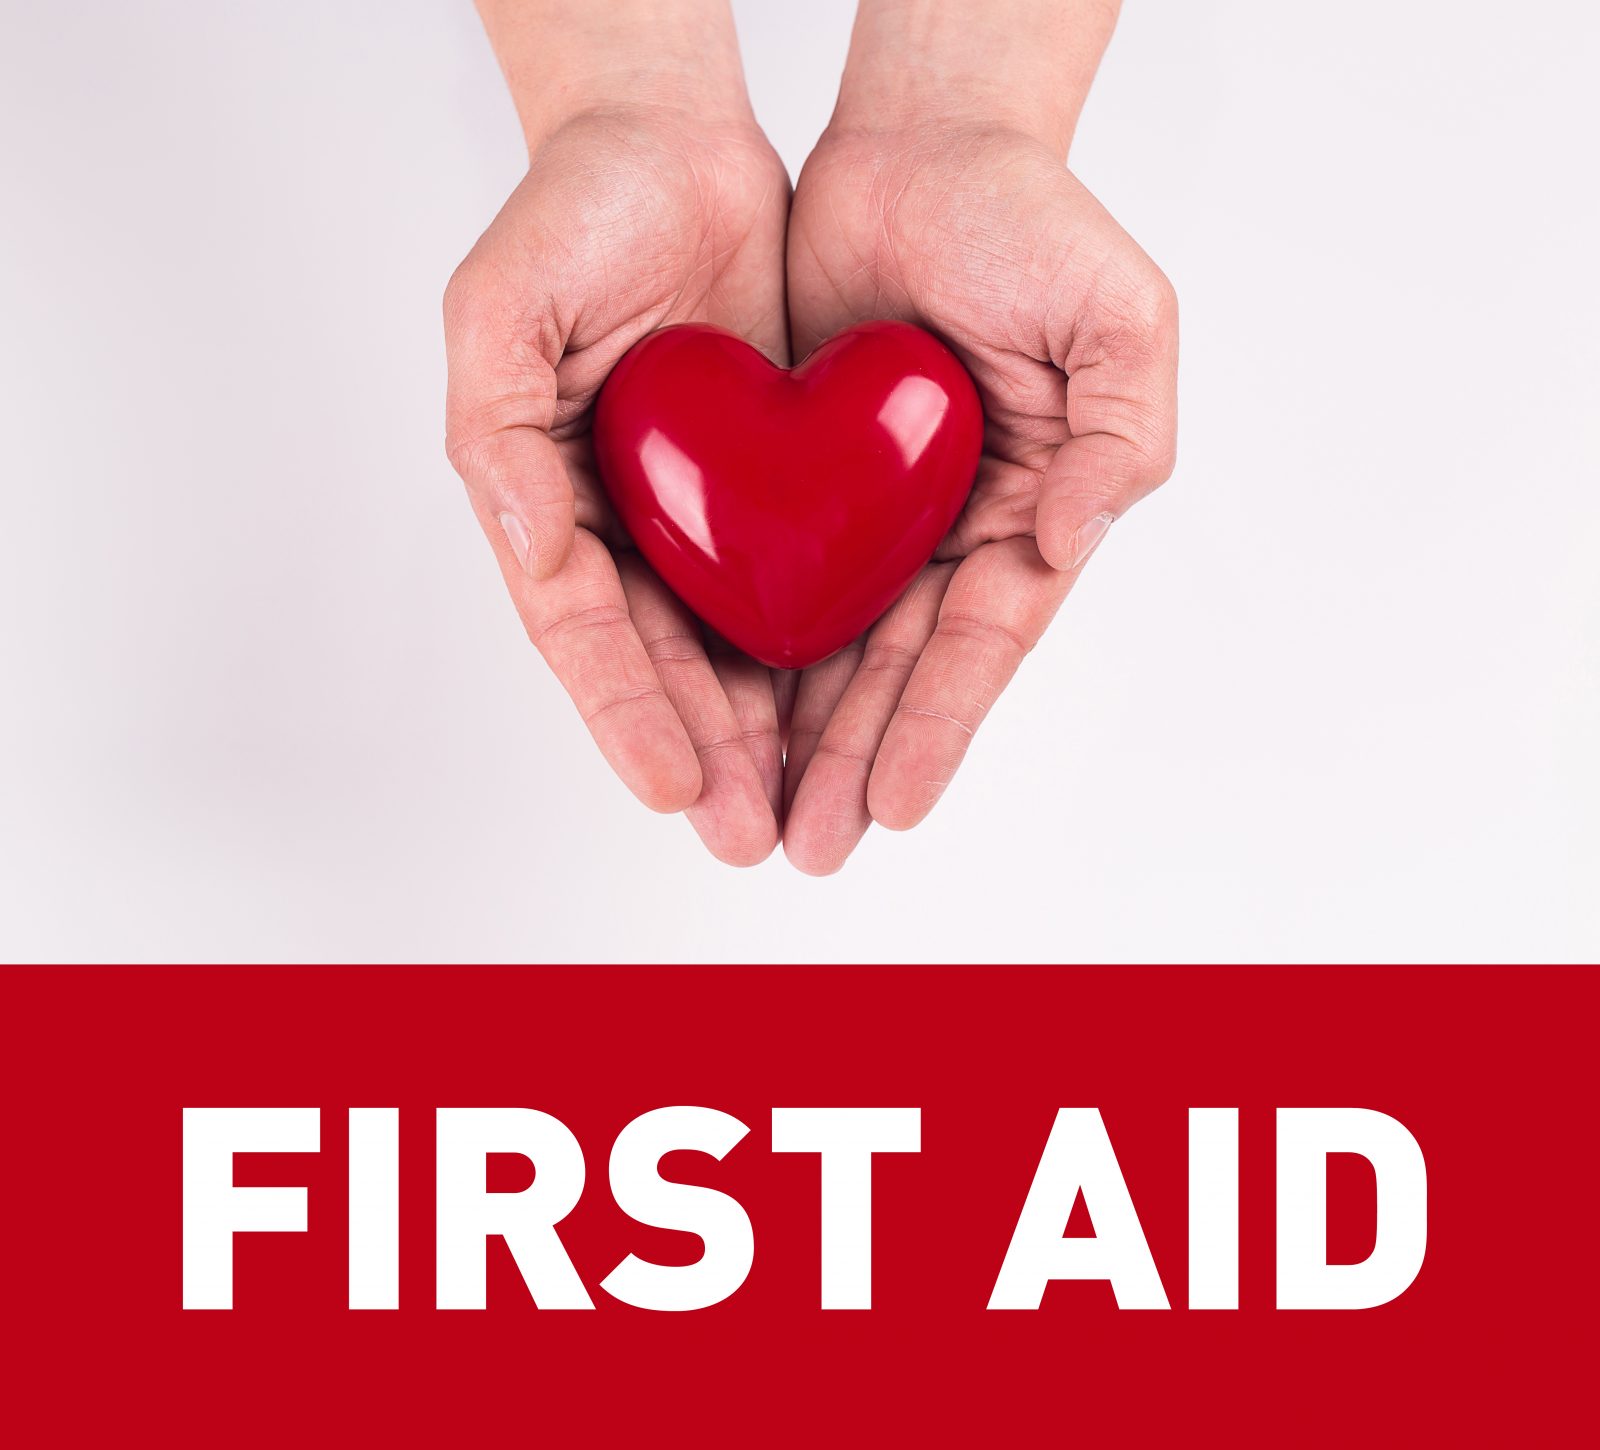 5 Reasons Why Basic First Aid Knowledge Is Important